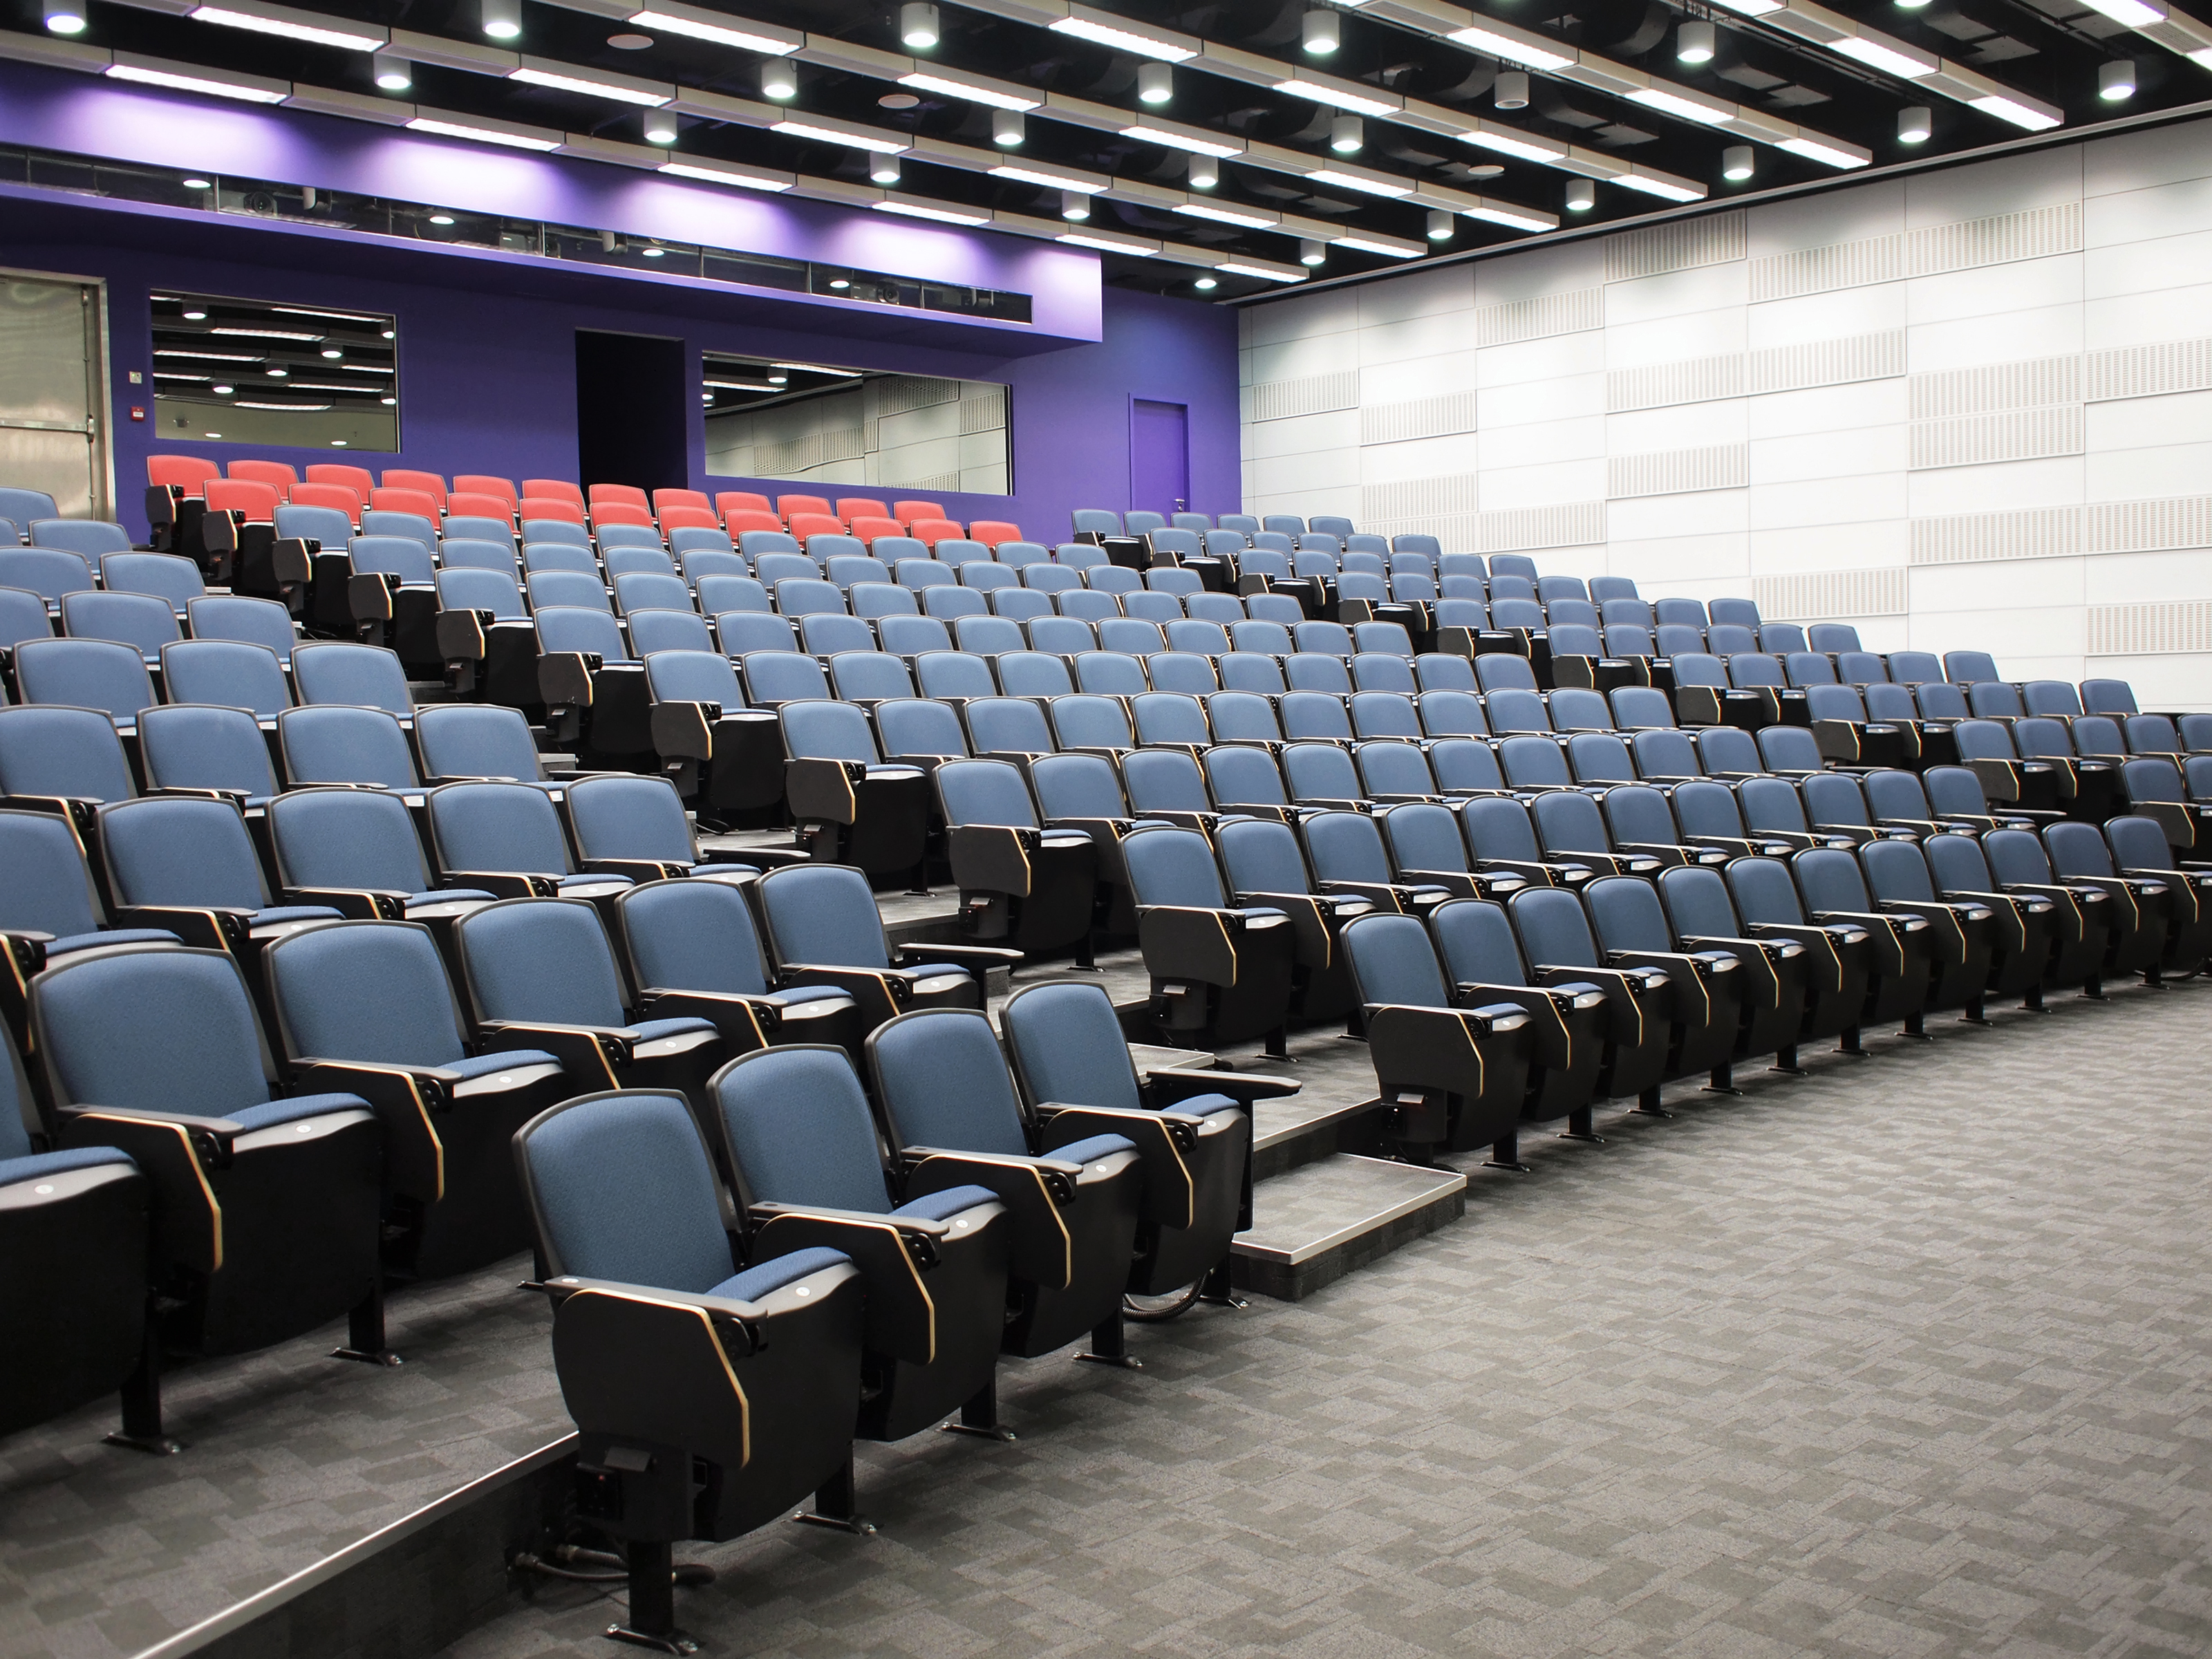 a large auditorium with rows of blue and red seats